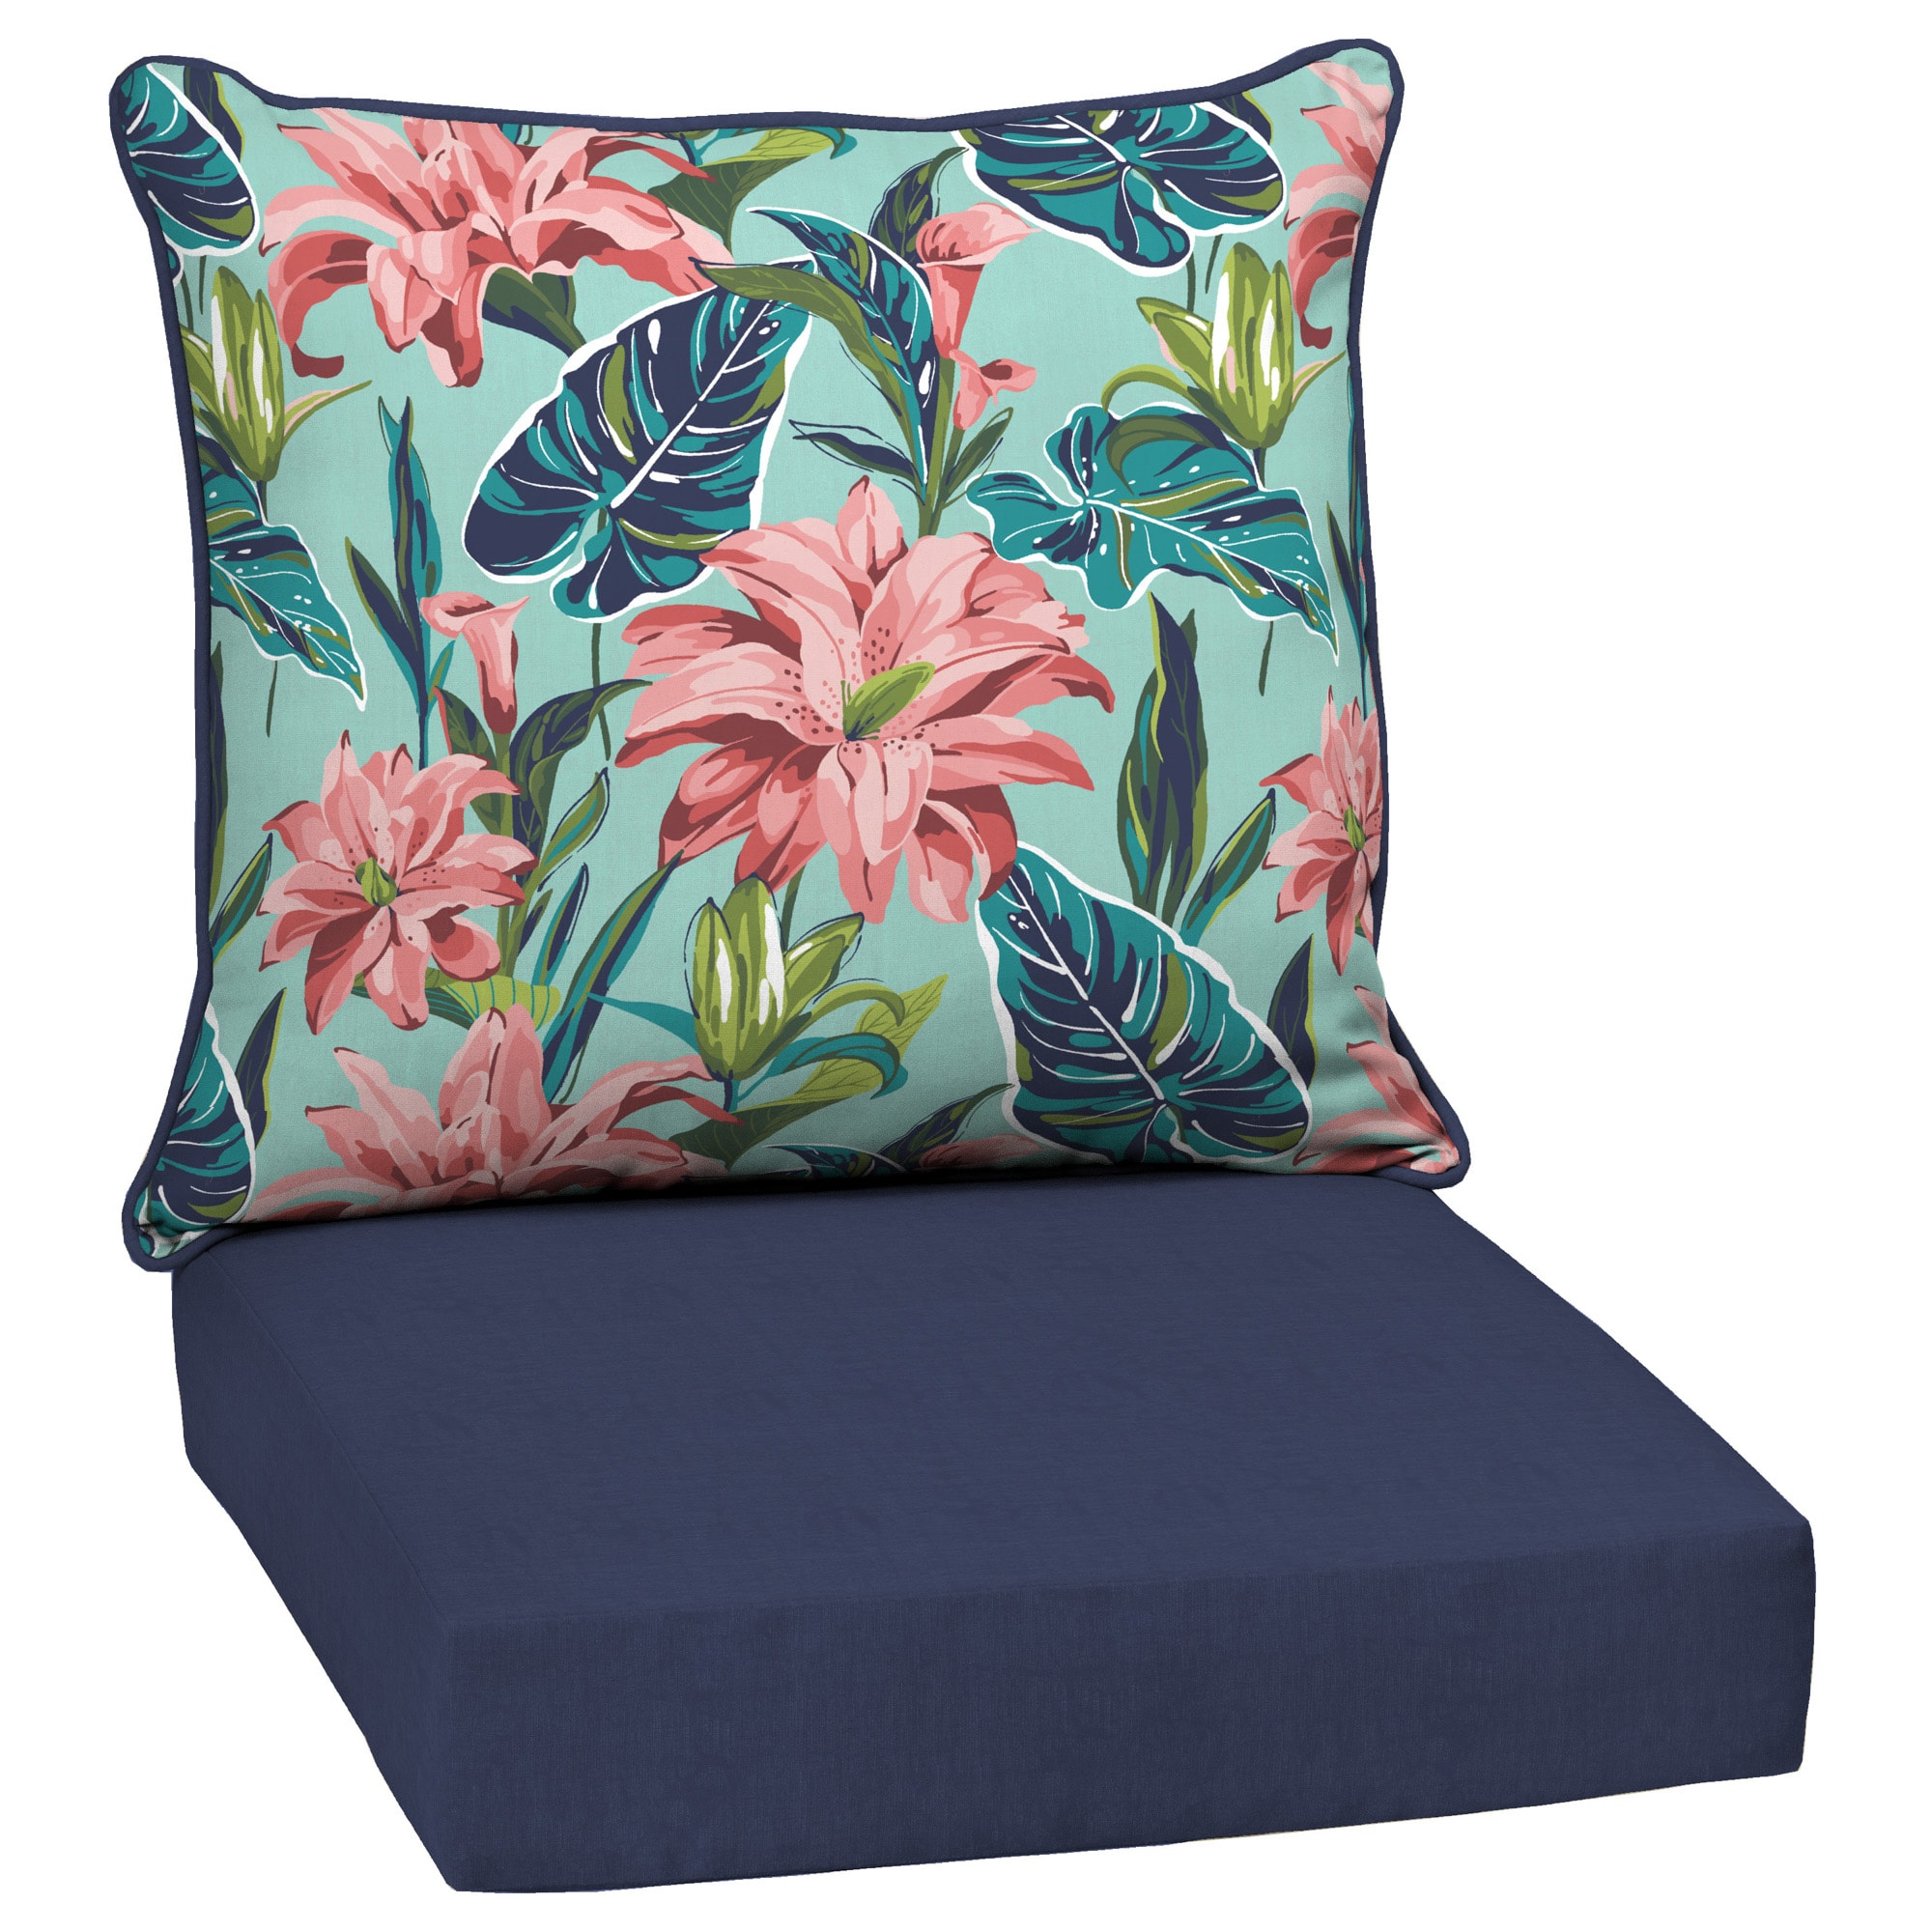 Thick outdoor cushions for extra comfort while relaxing on the